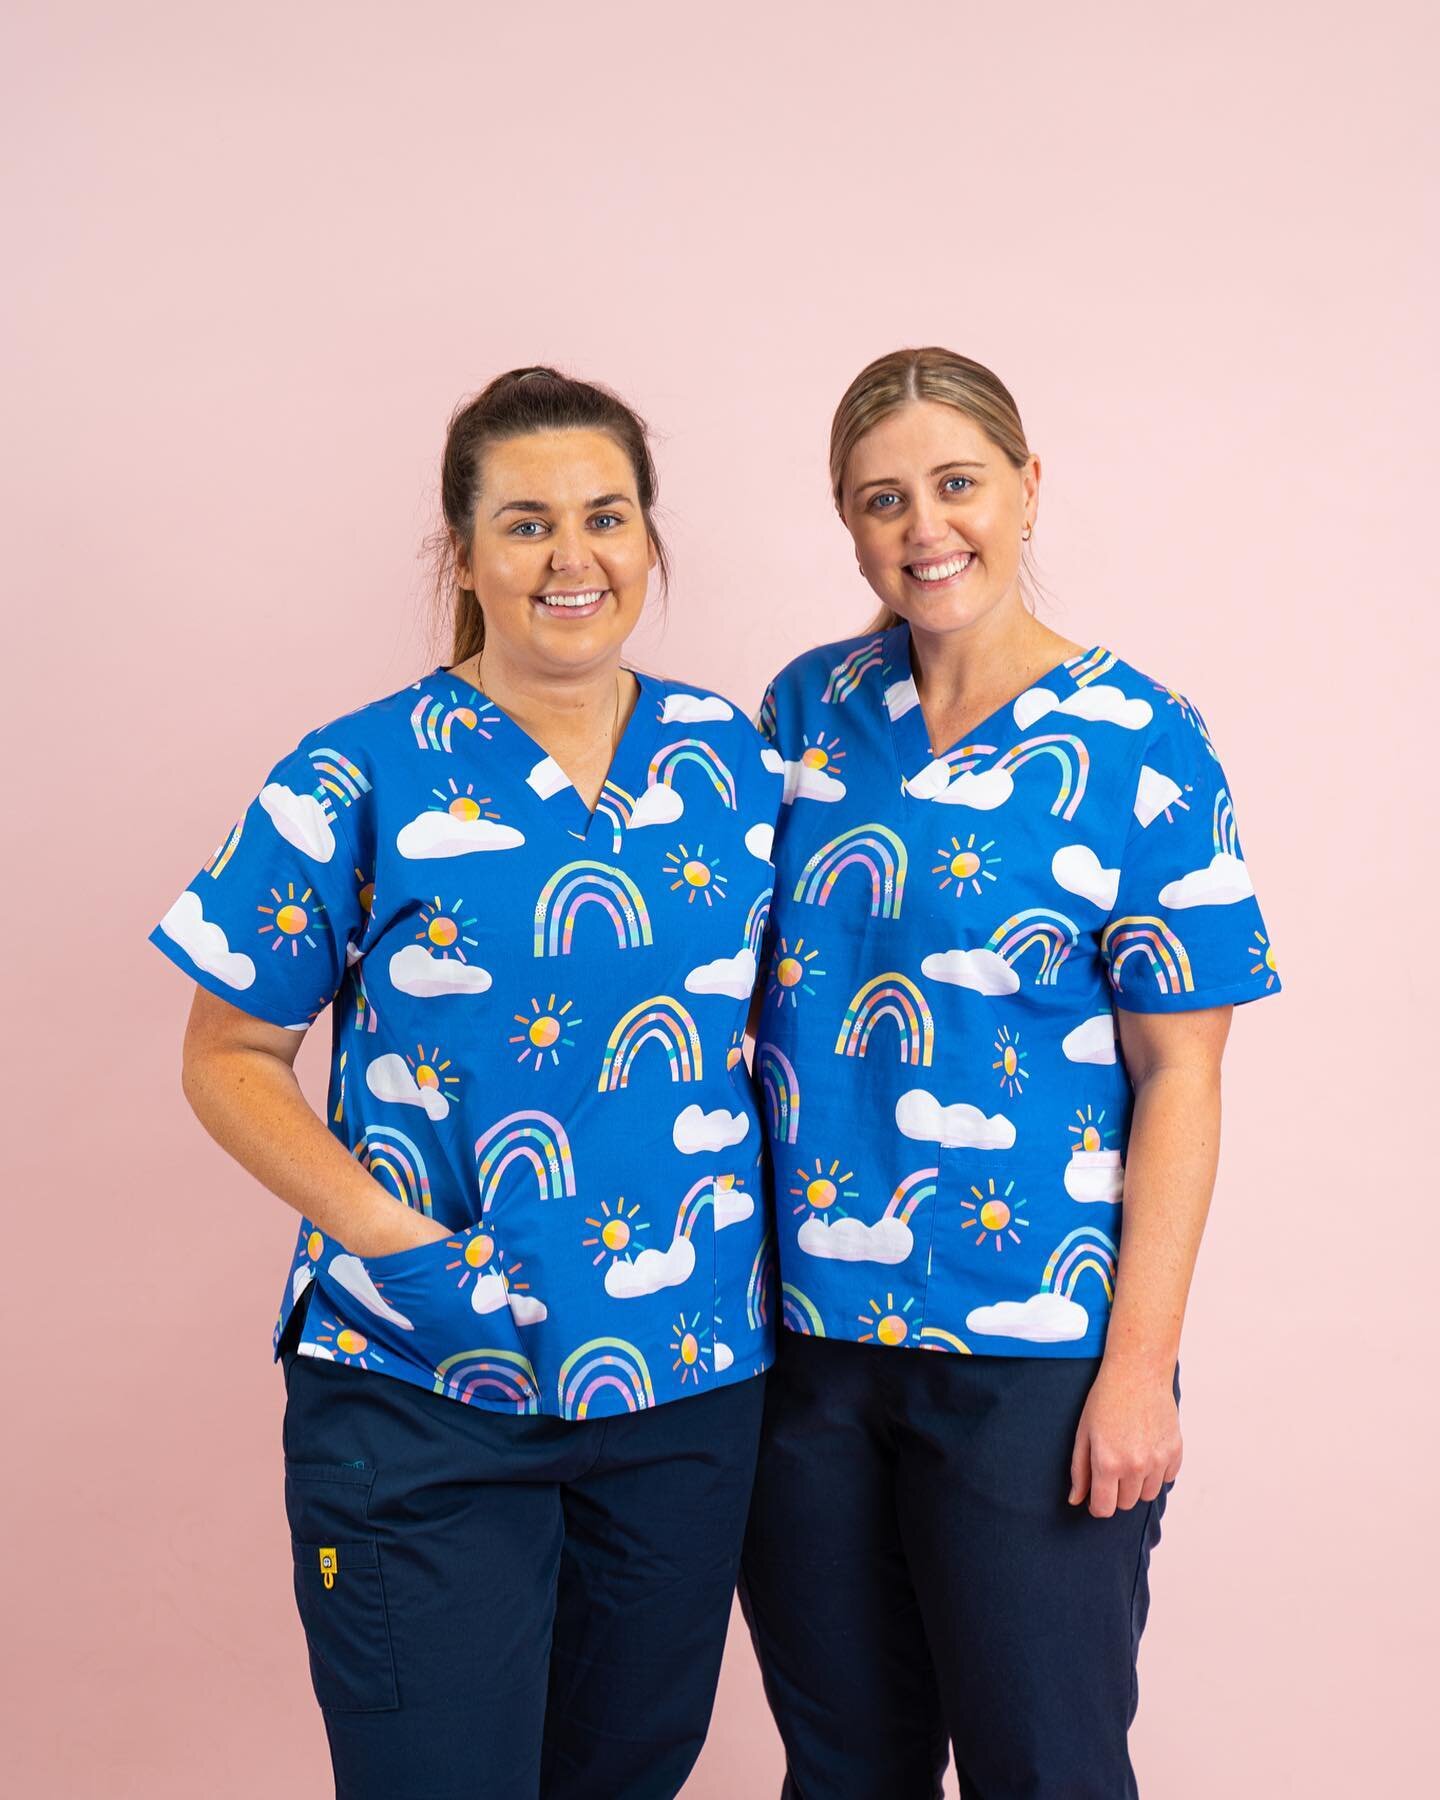 We had the most amazing photo shoot with @lewislotherington and the results are stunnin!

These models are real life nurses too&hellip; swipe for evidence!

The artwork on these tops is by the incredibly talented @brookgossen. I can&rsquo;t get enoug